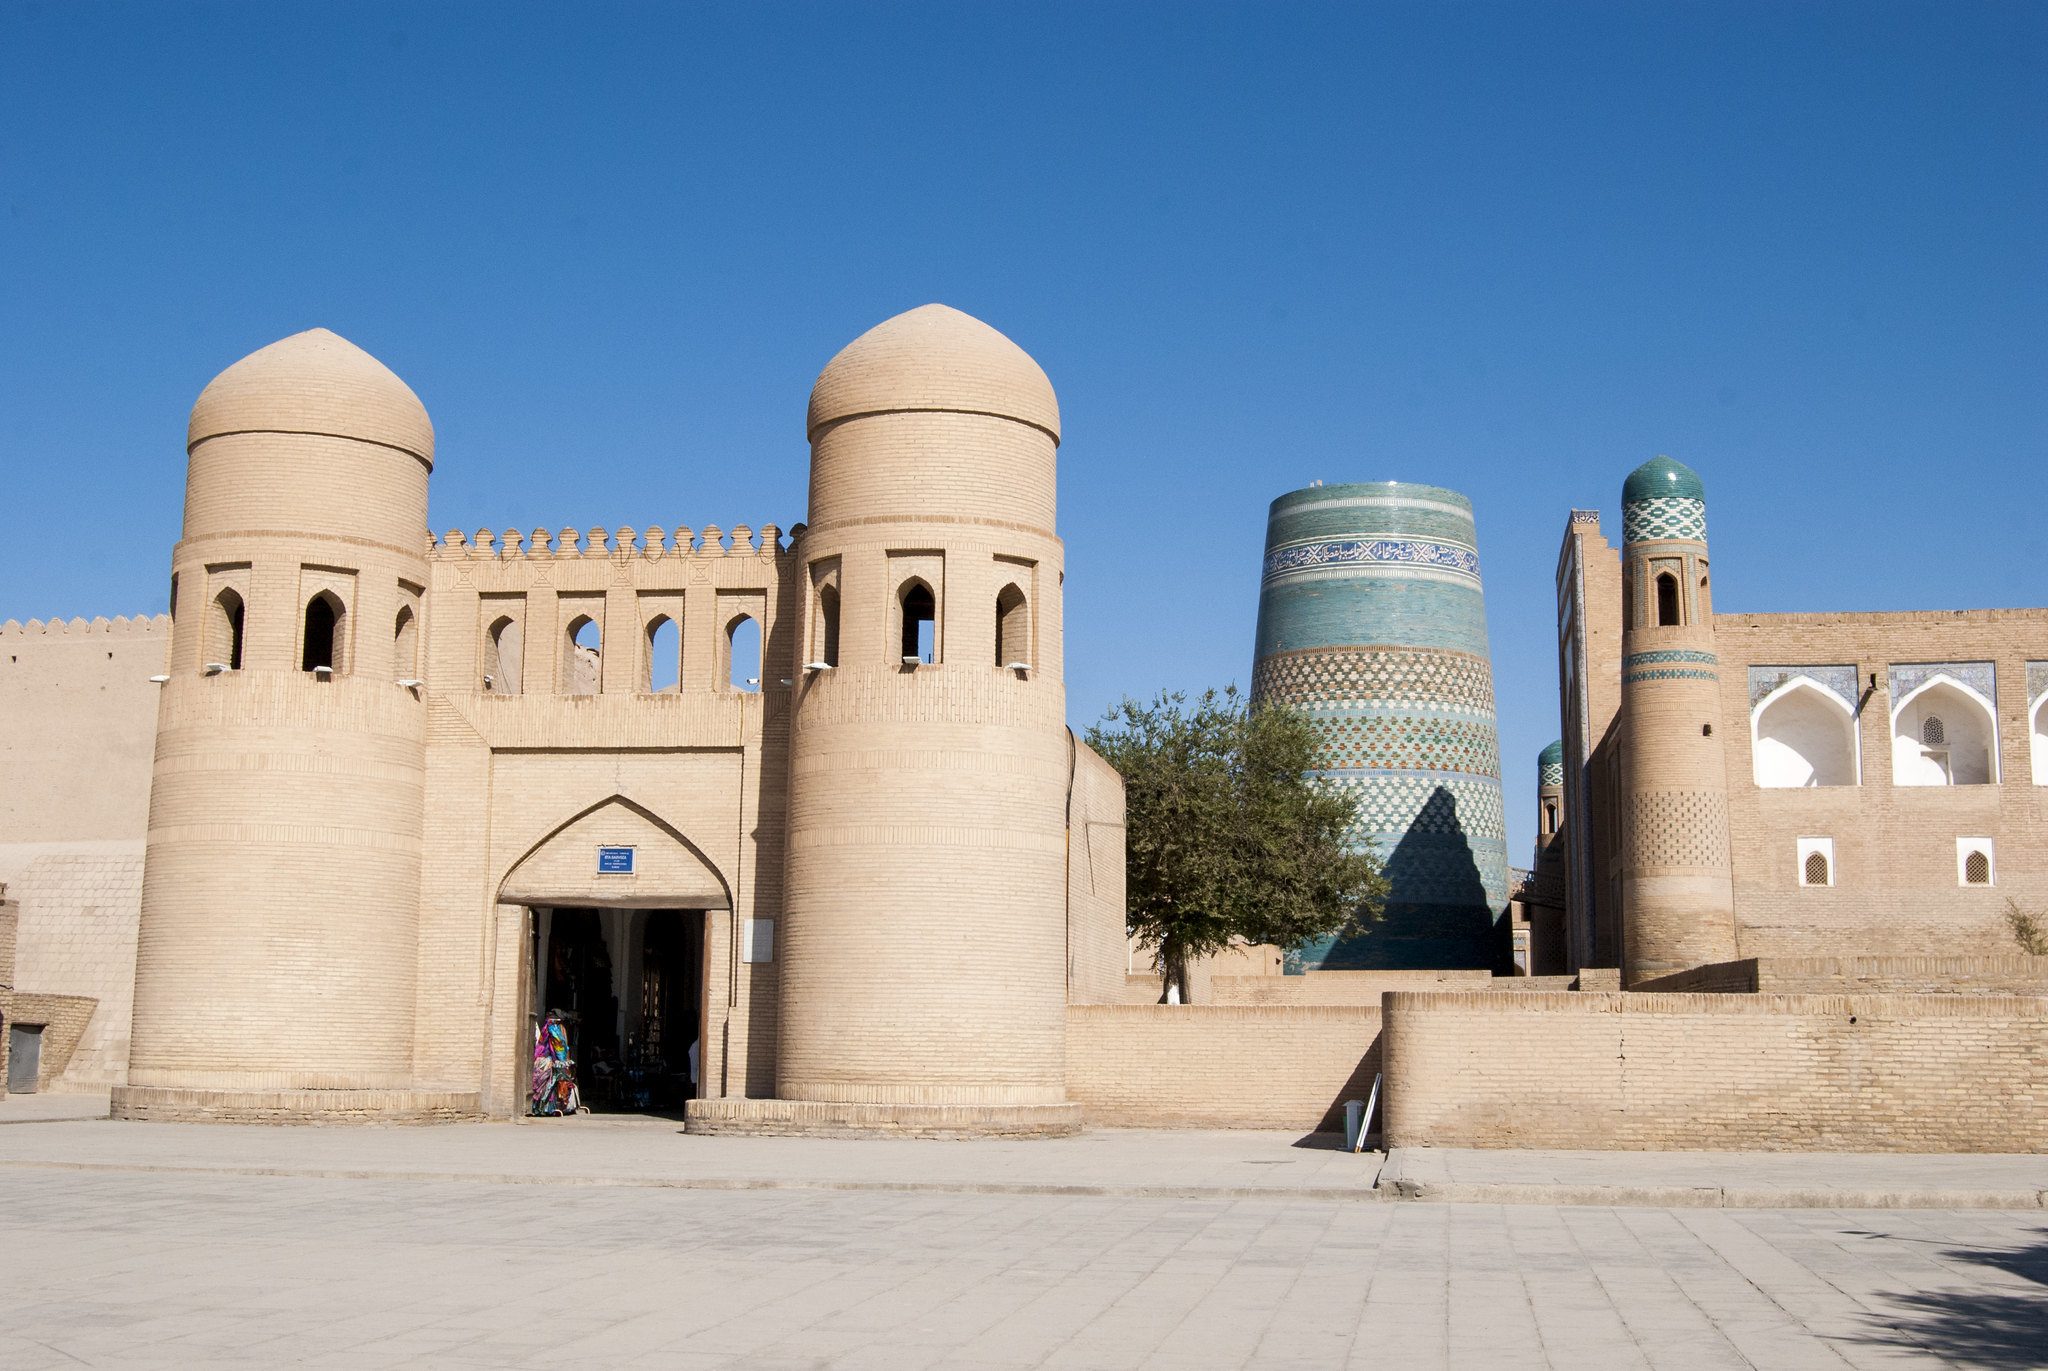 Central Asia Travel Guide 11 Things To Do In Uzbekistan